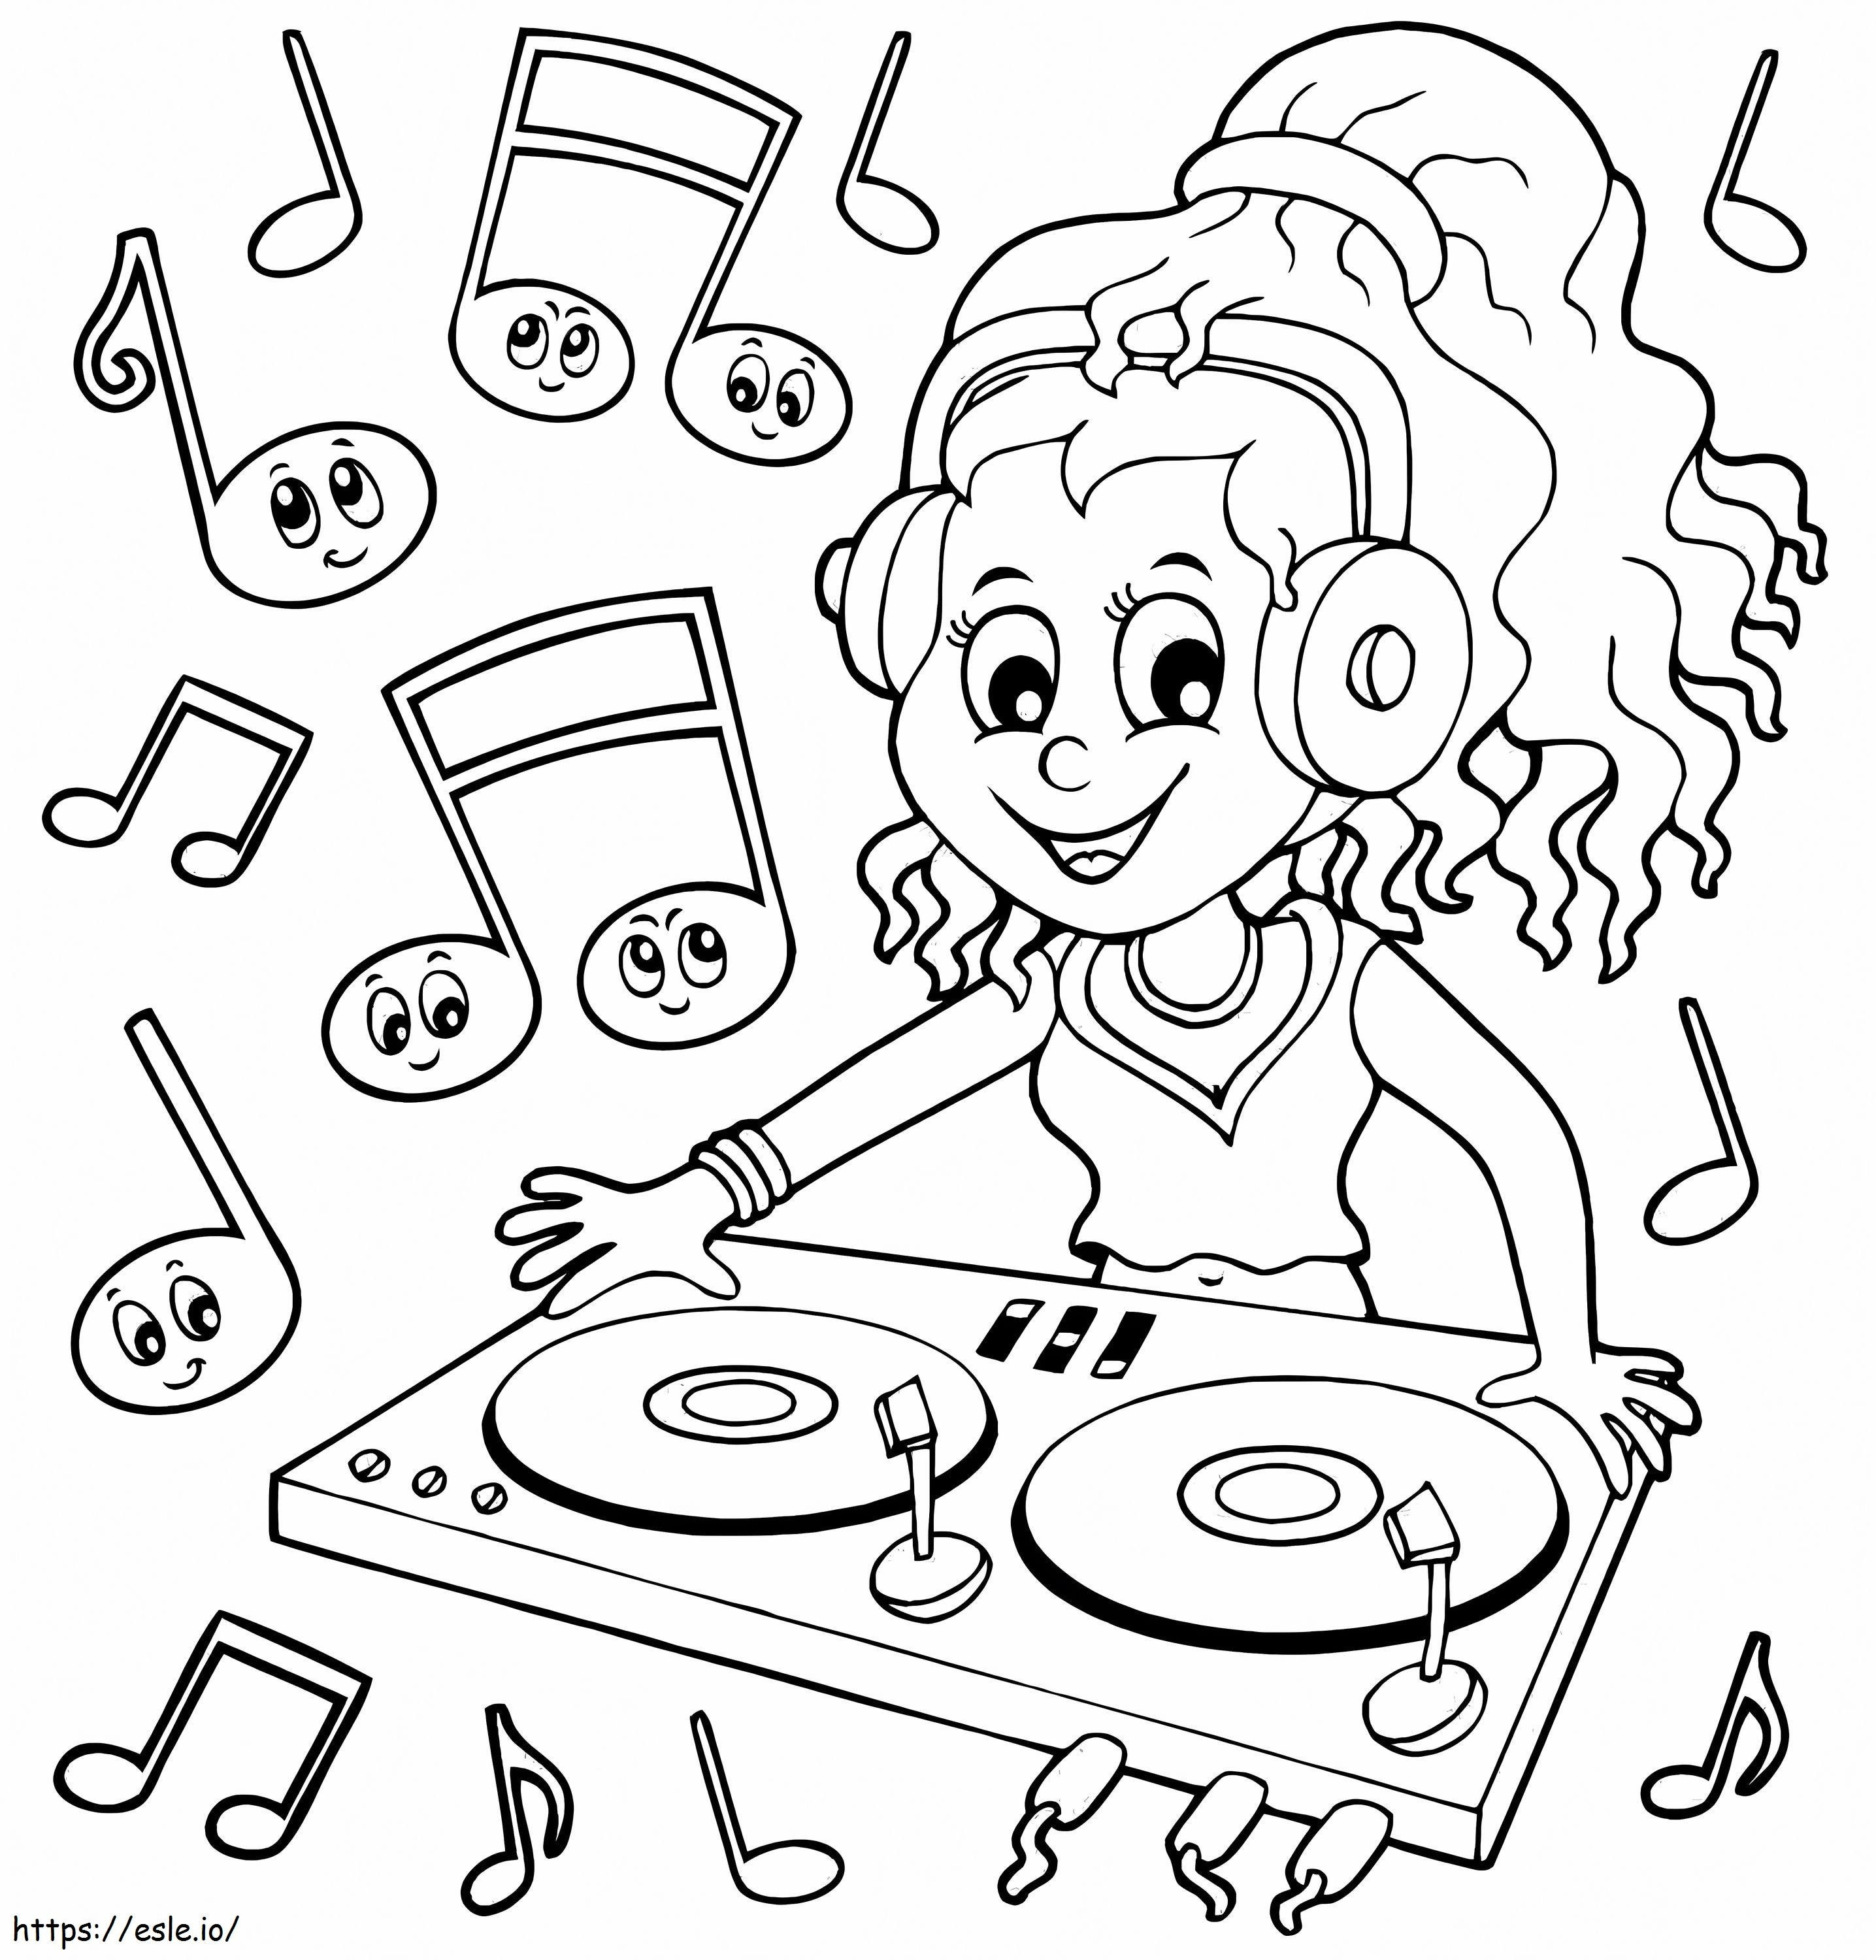 Dj Girl coloring page